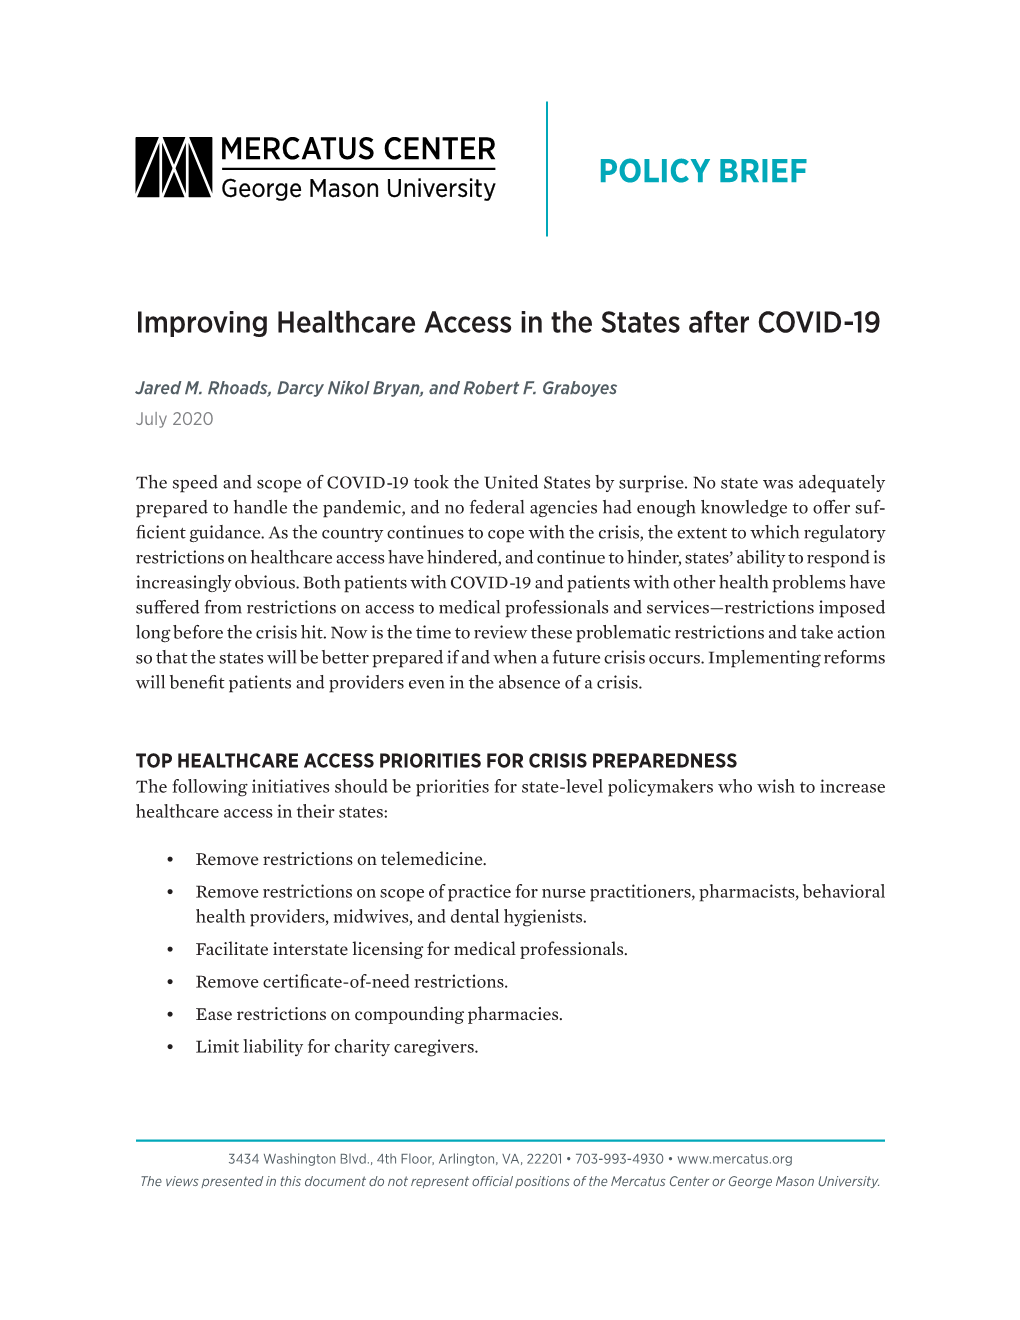 Improving Healthcare Access in the States After COVID-19